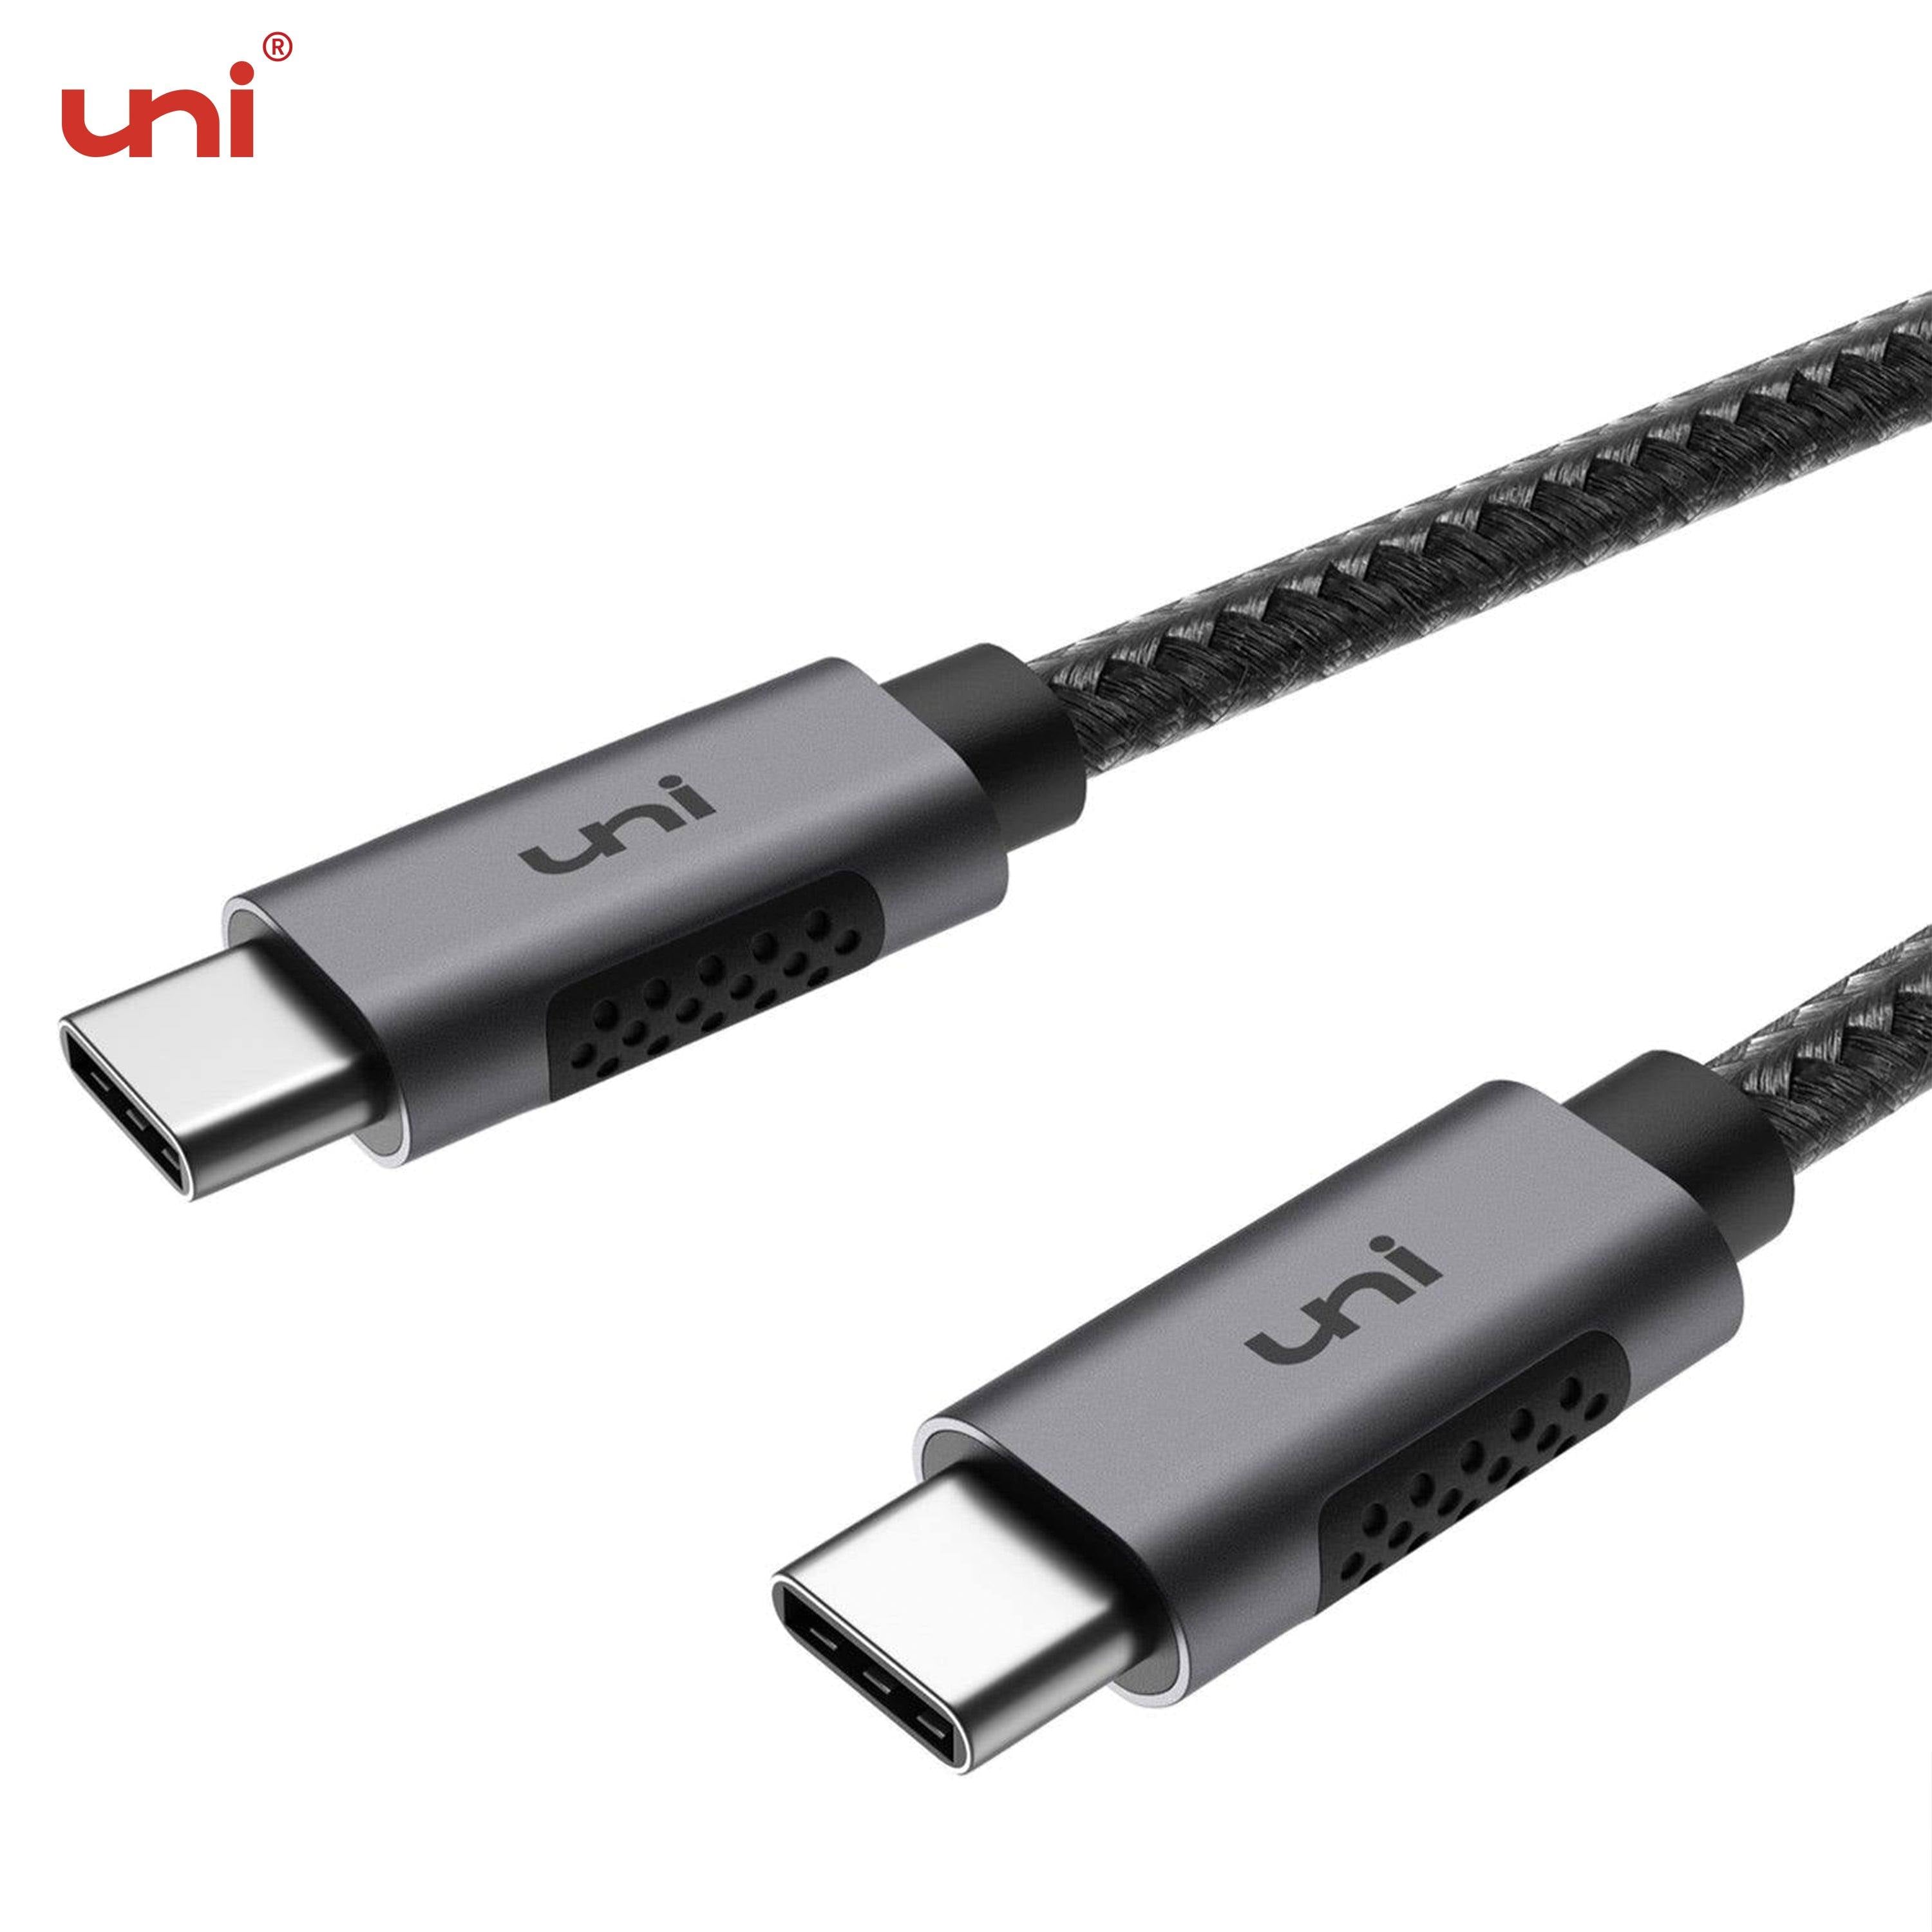 uni® USB C Fast Charging Cable, 100W 5A Cable, Extra Durable